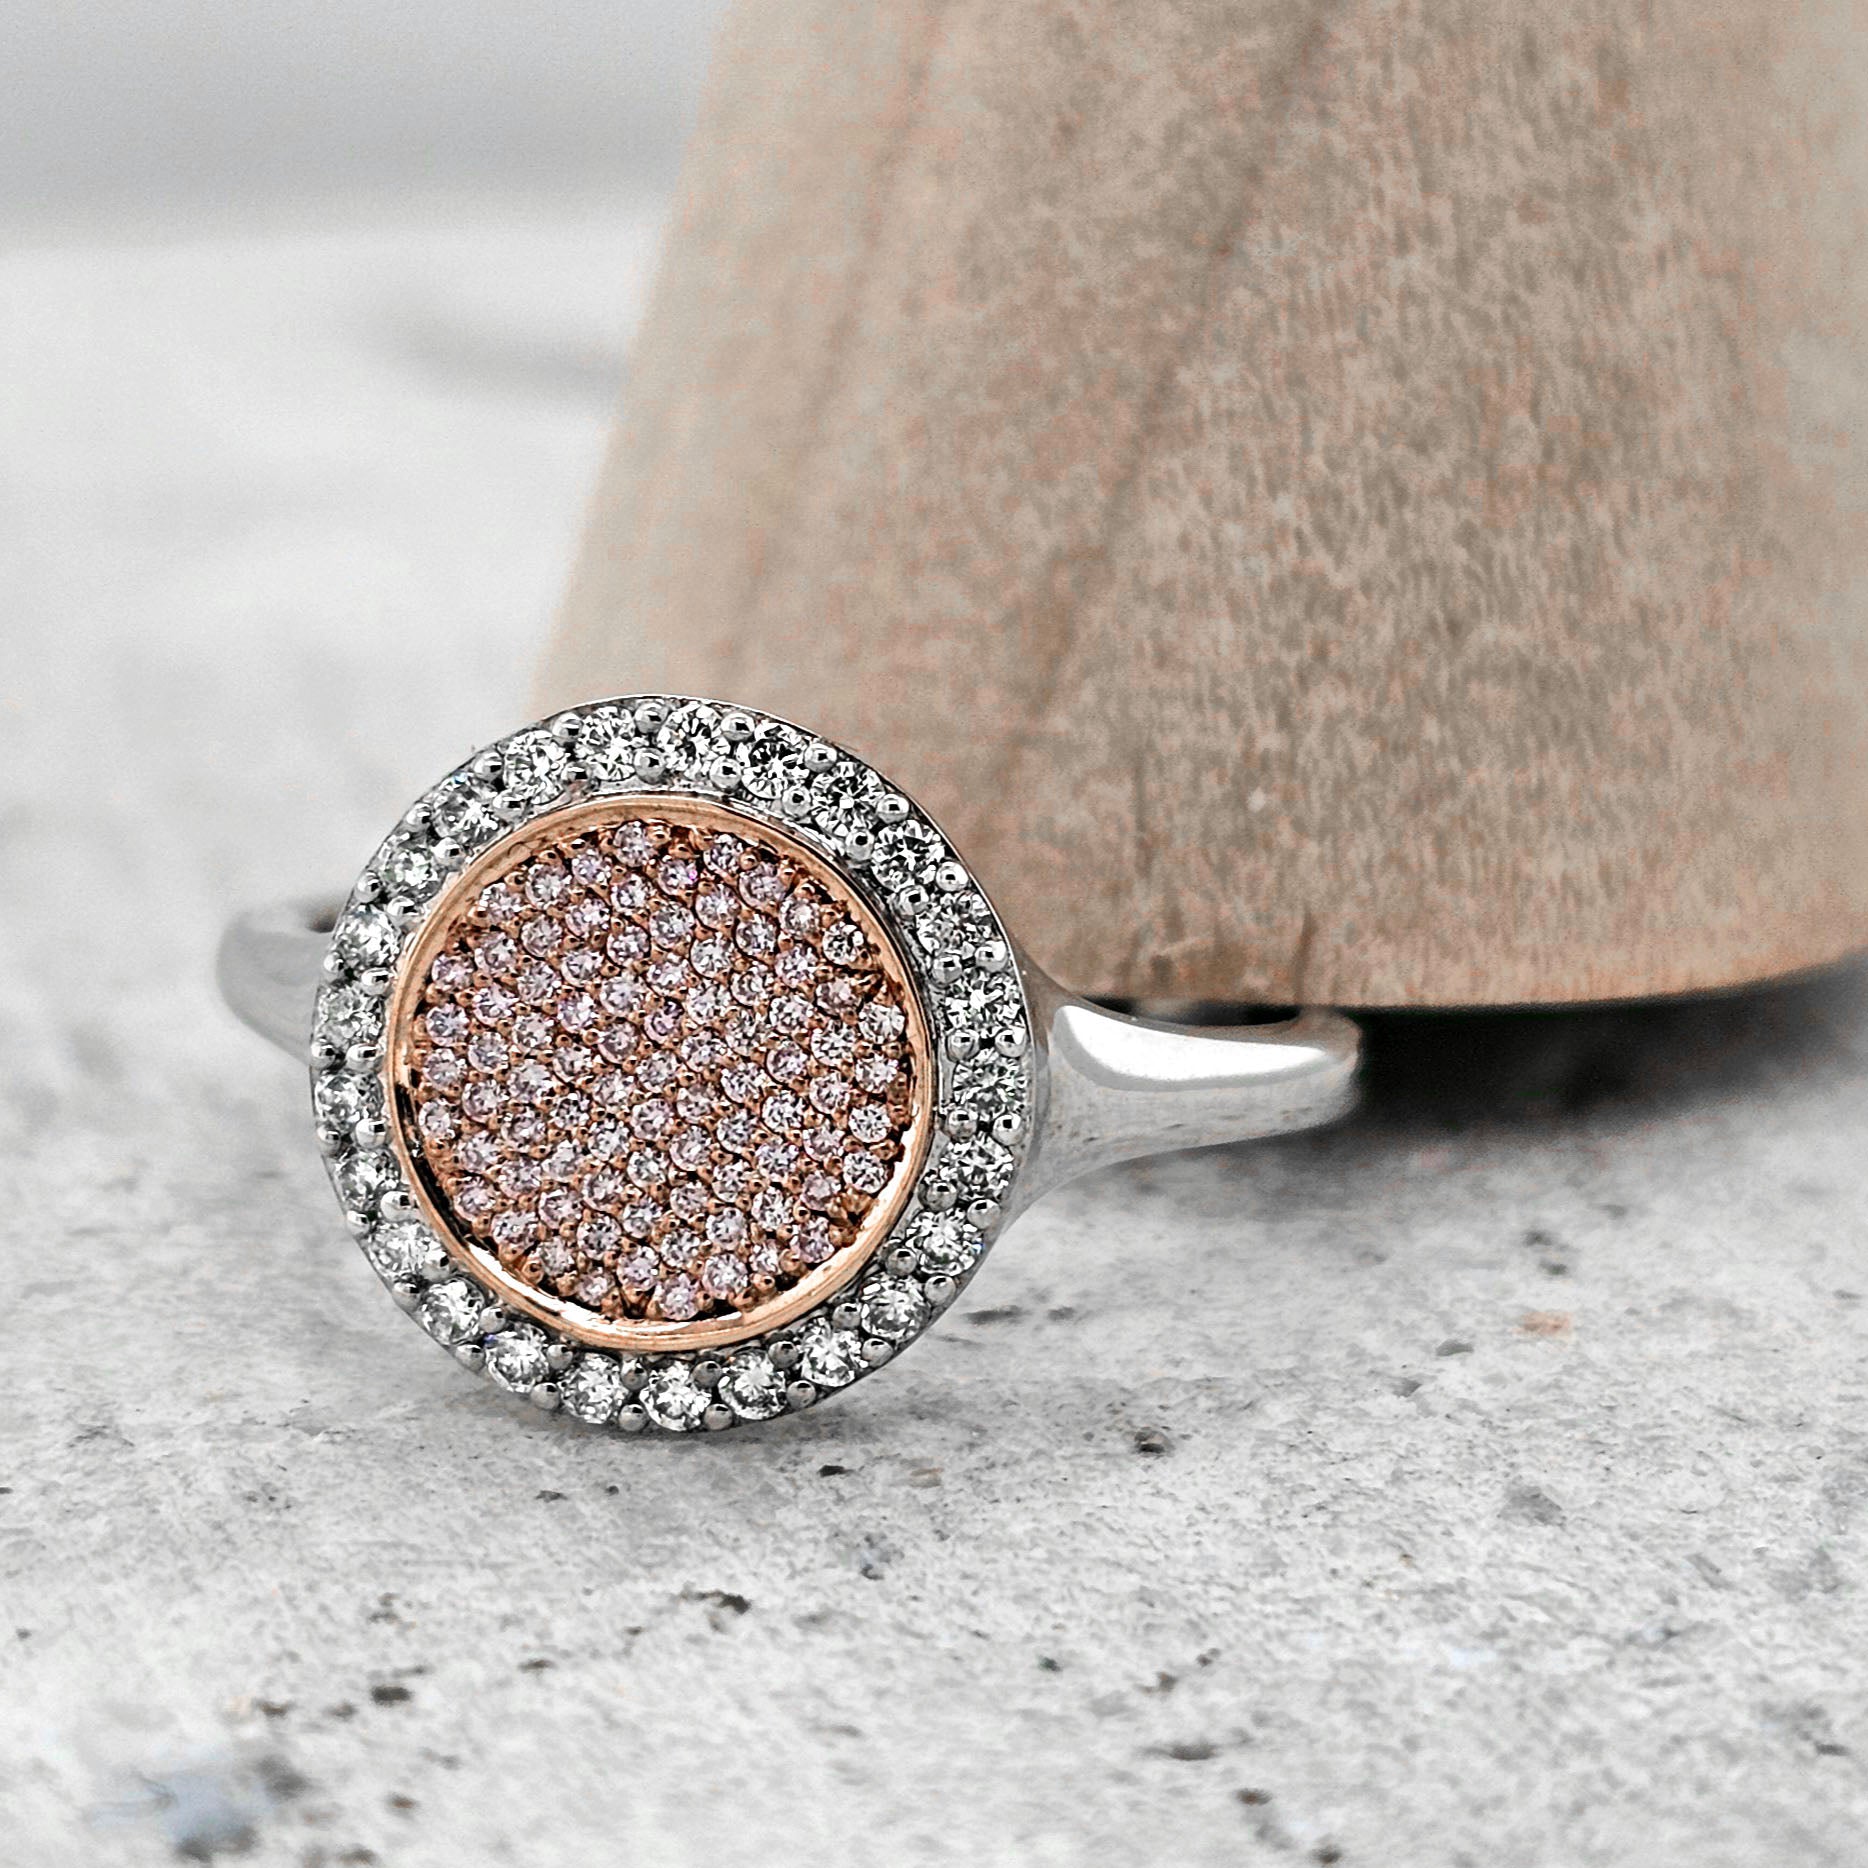 Argyle Pink Caviar Diamonds set in 9ct White, Yellow and Rose Gold, 0.32 carats total.